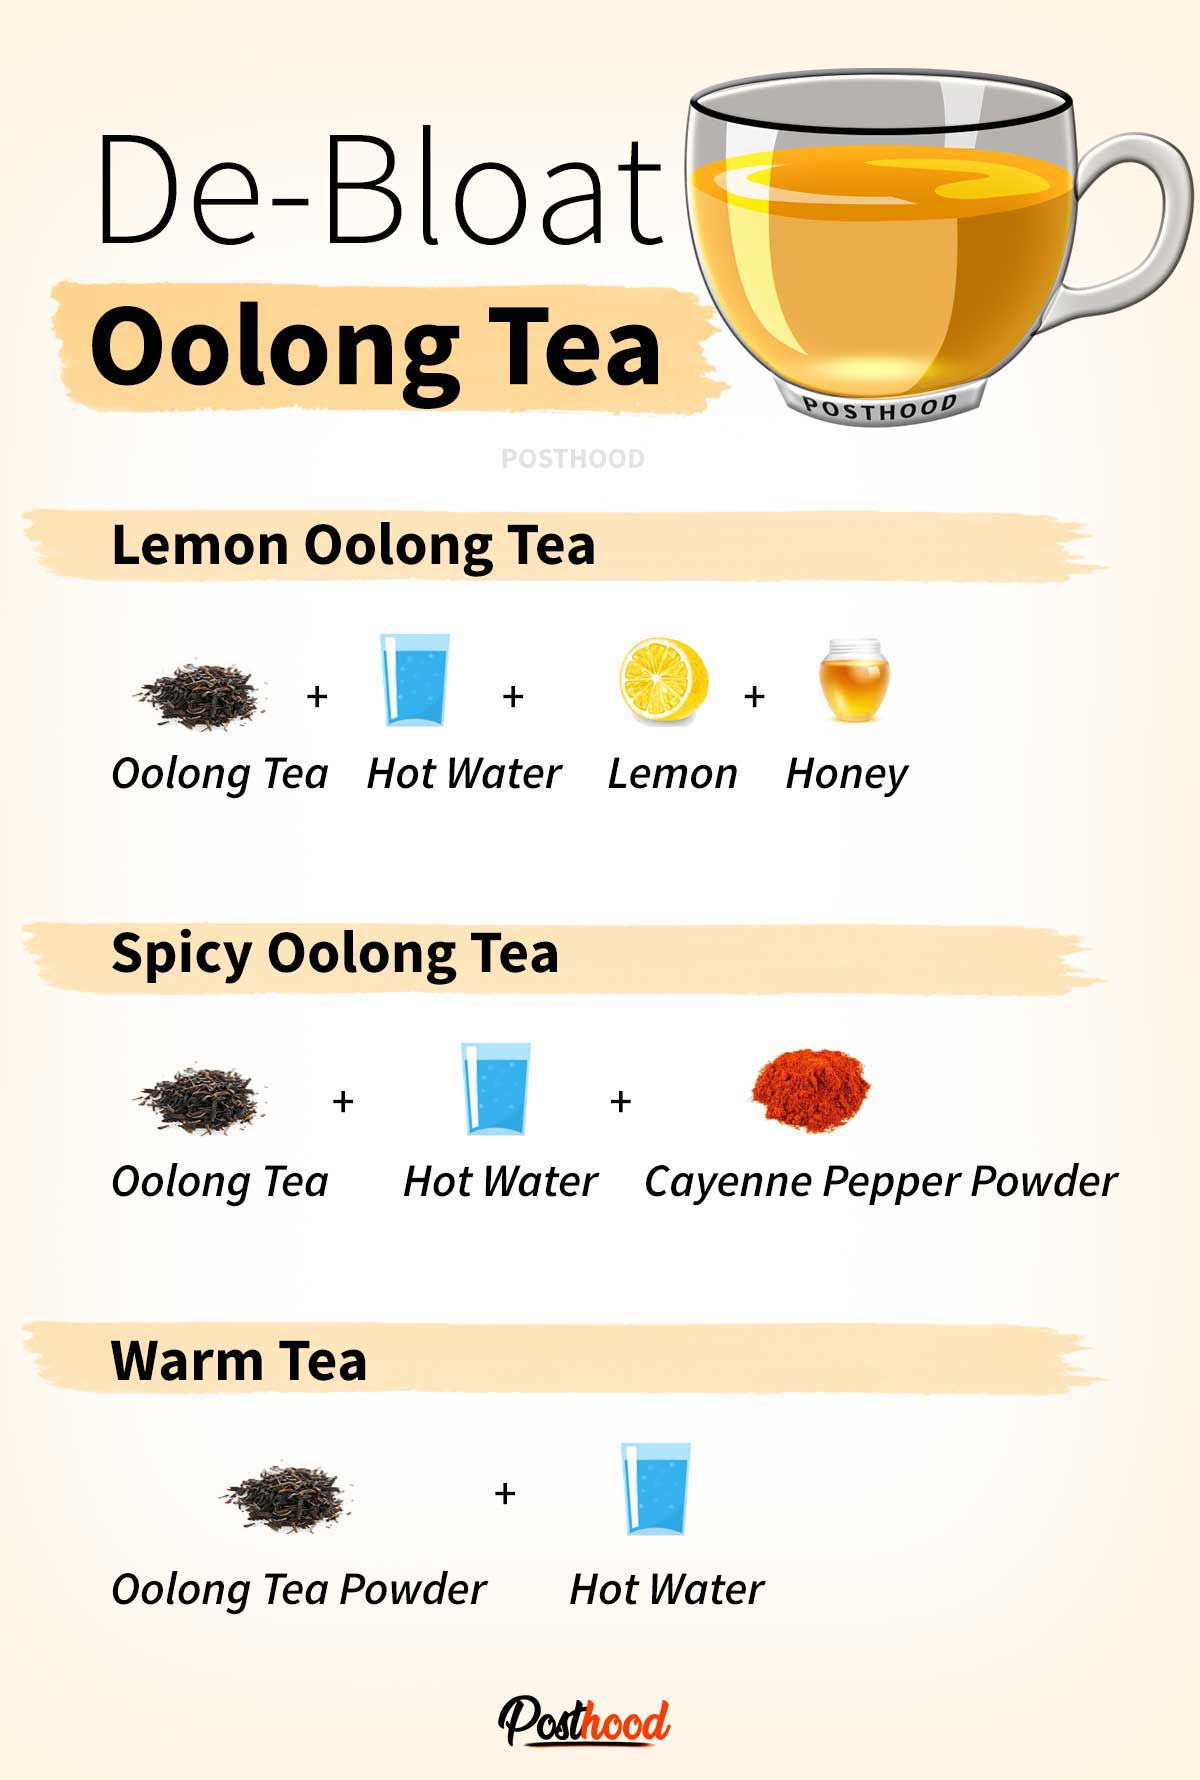 De-bloat oolong tea. Know how to prepare, benefits, and when to drink for weight loss and flat belly. 5 best herbal tea that helps in weight loss.